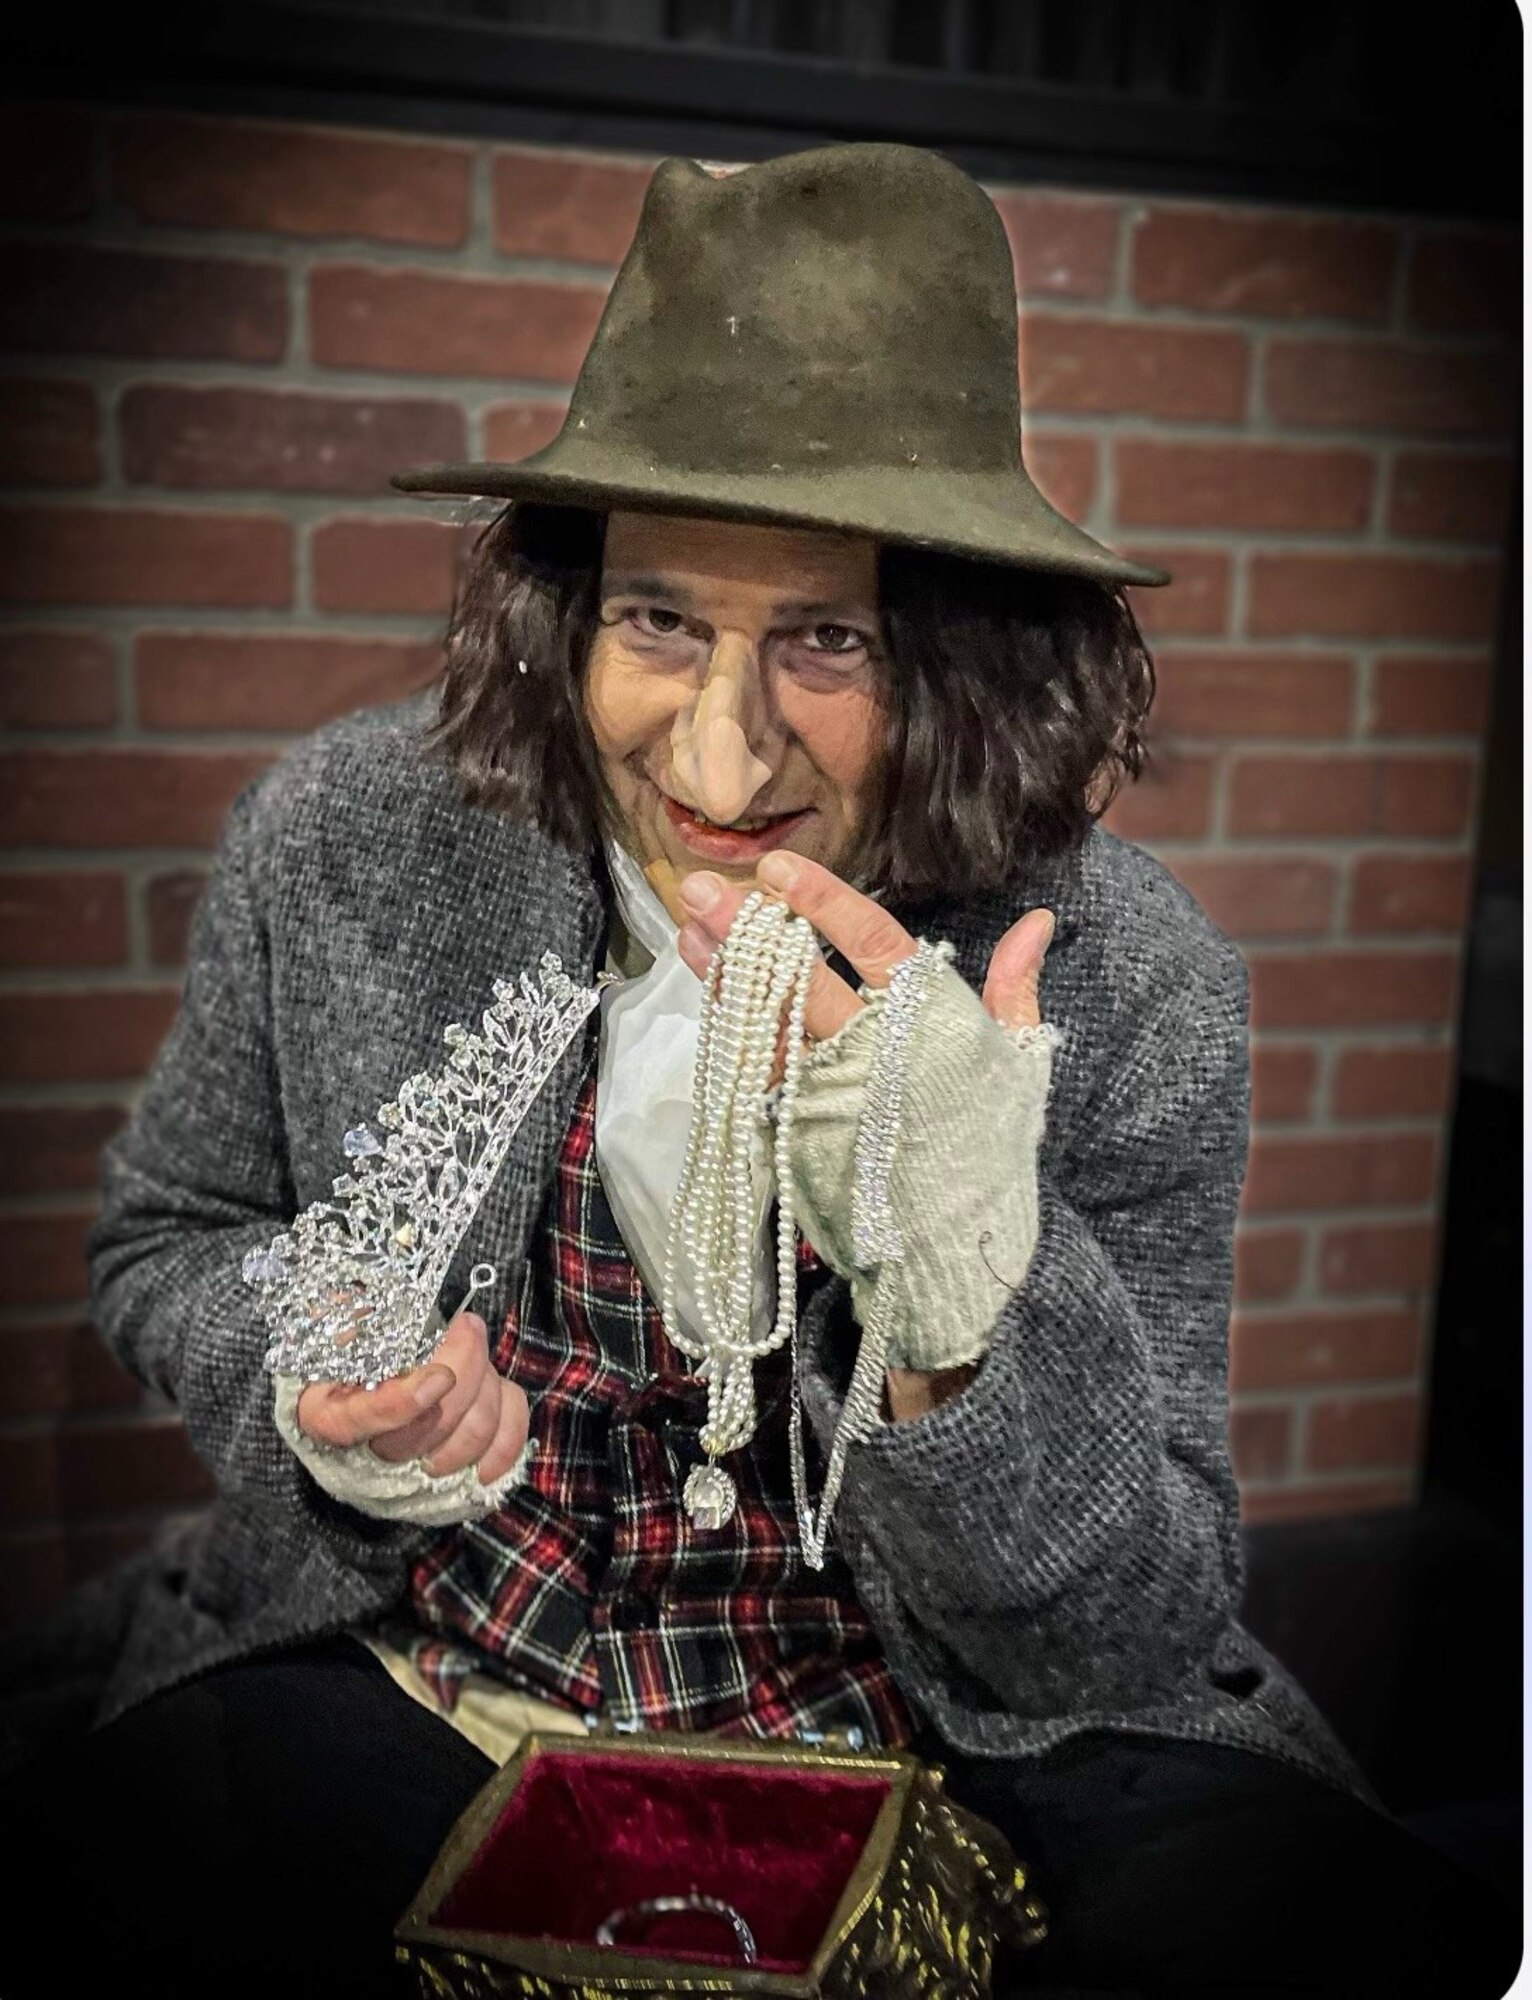 J.D. Dill, Arnold Engineering Development Complex team member is shown in full costumer as the character Fagin in the musical “Oliver!” during a rehearsal in January at the Manchester Arts Center in Manchester, Tennessee.